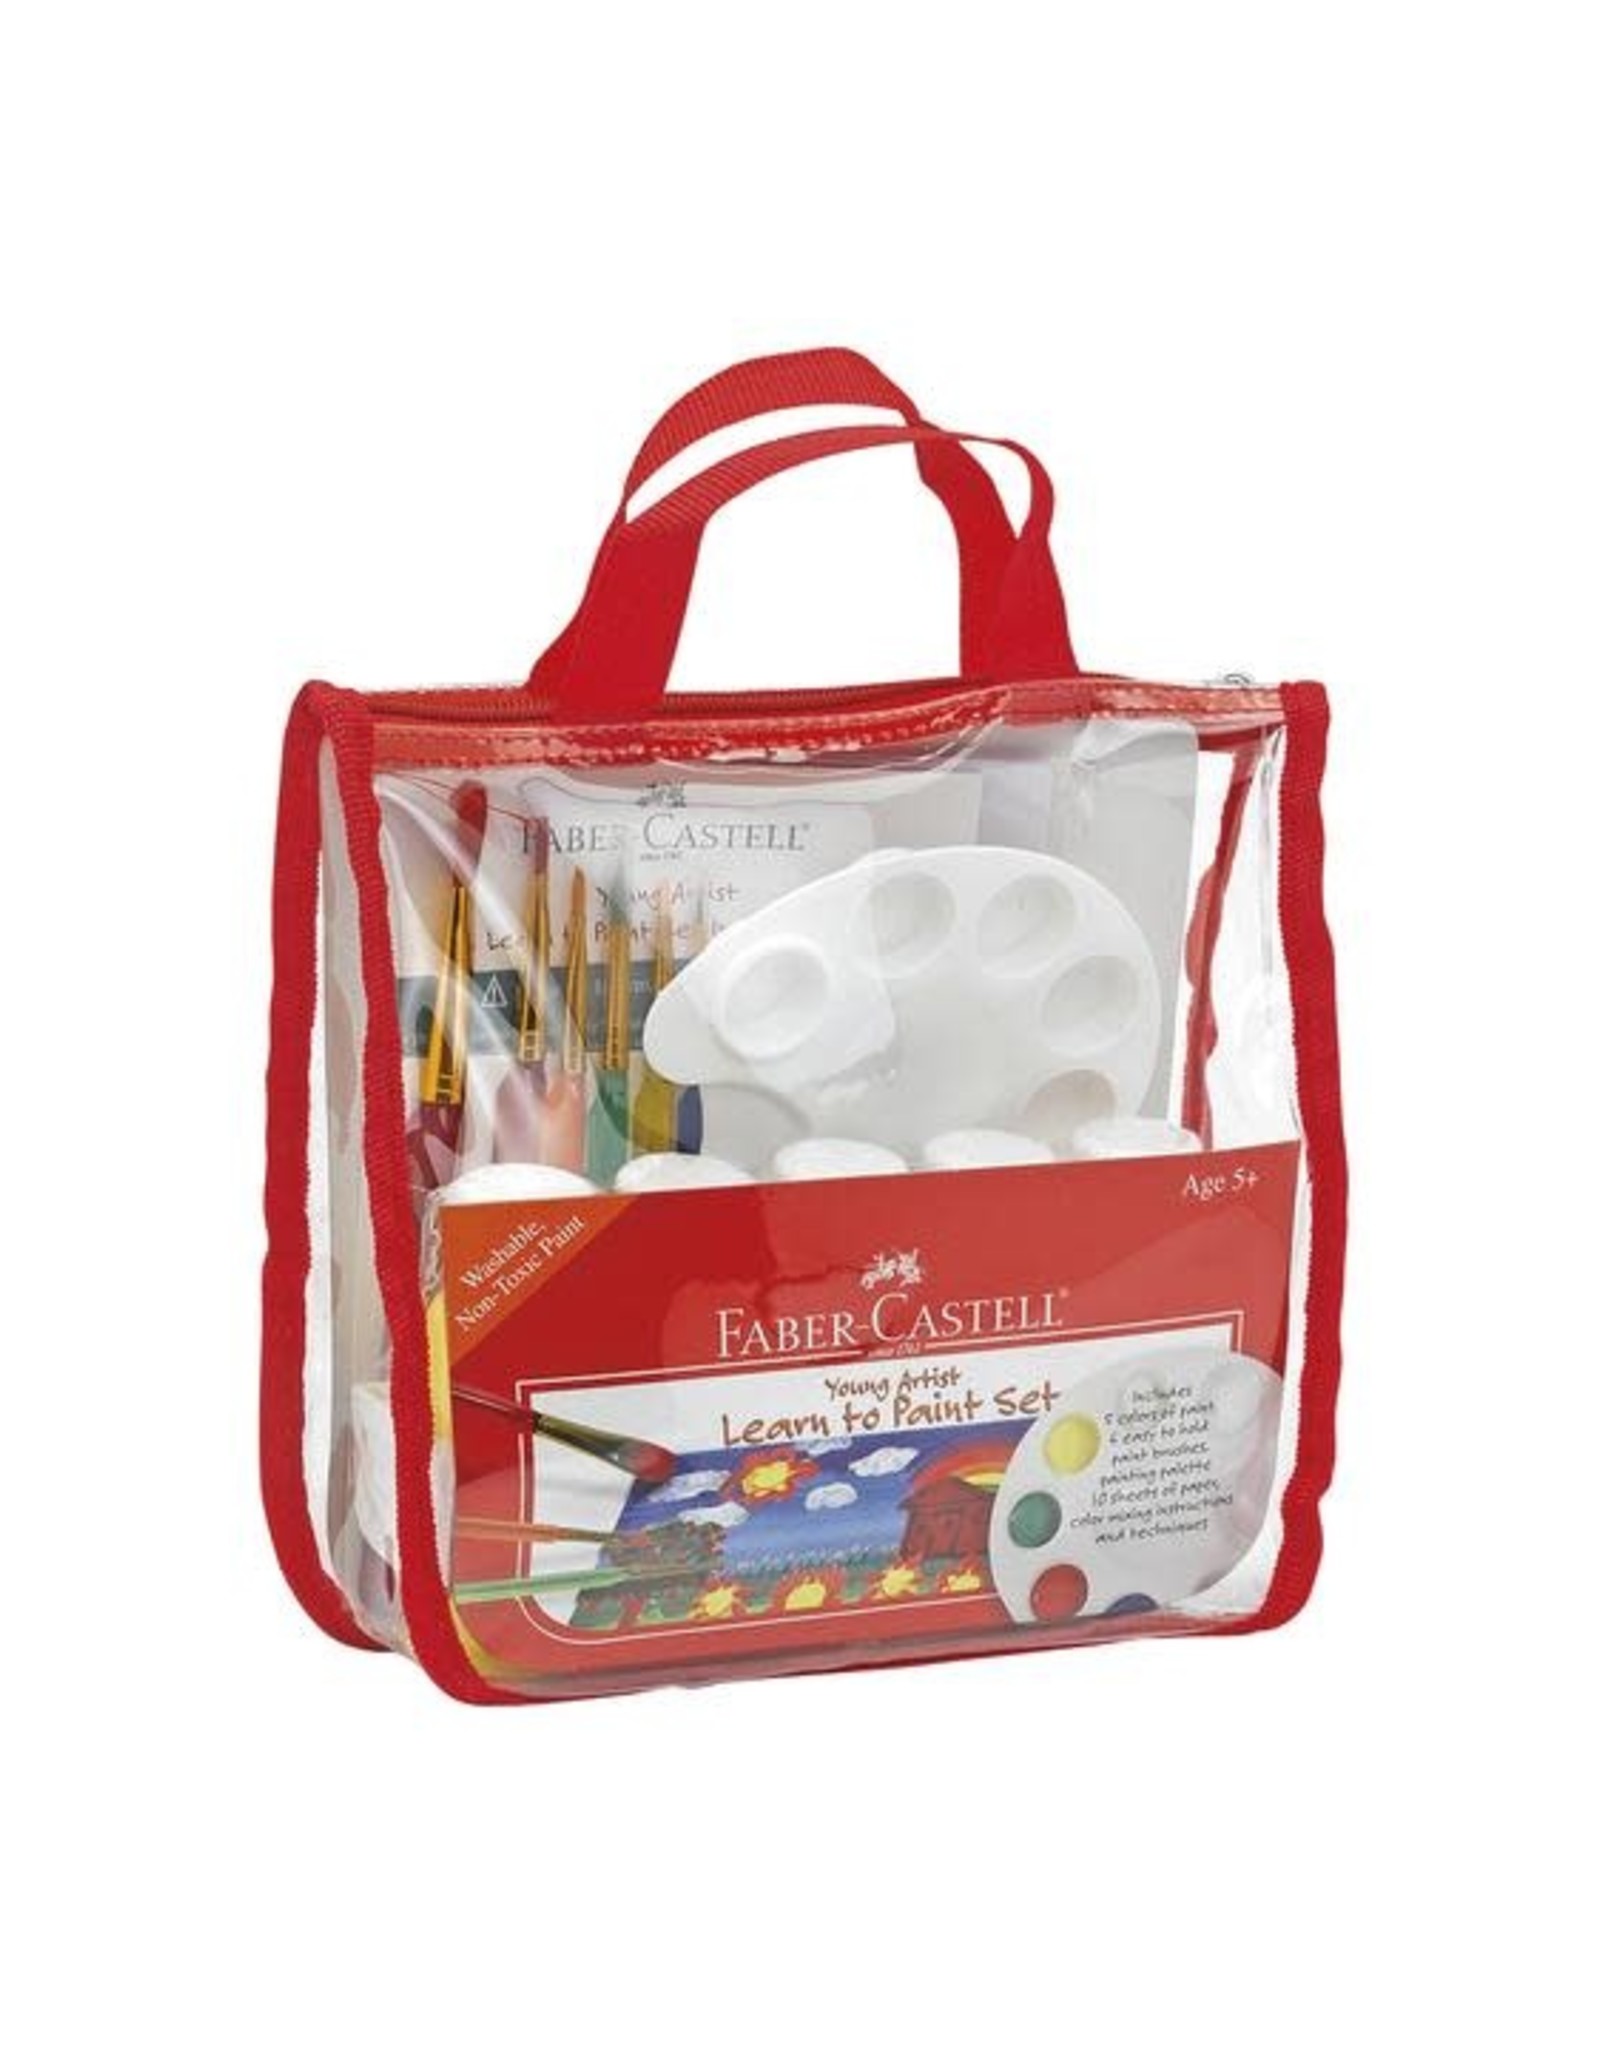 Faber-Castell Young Artist Learn to Paint Set